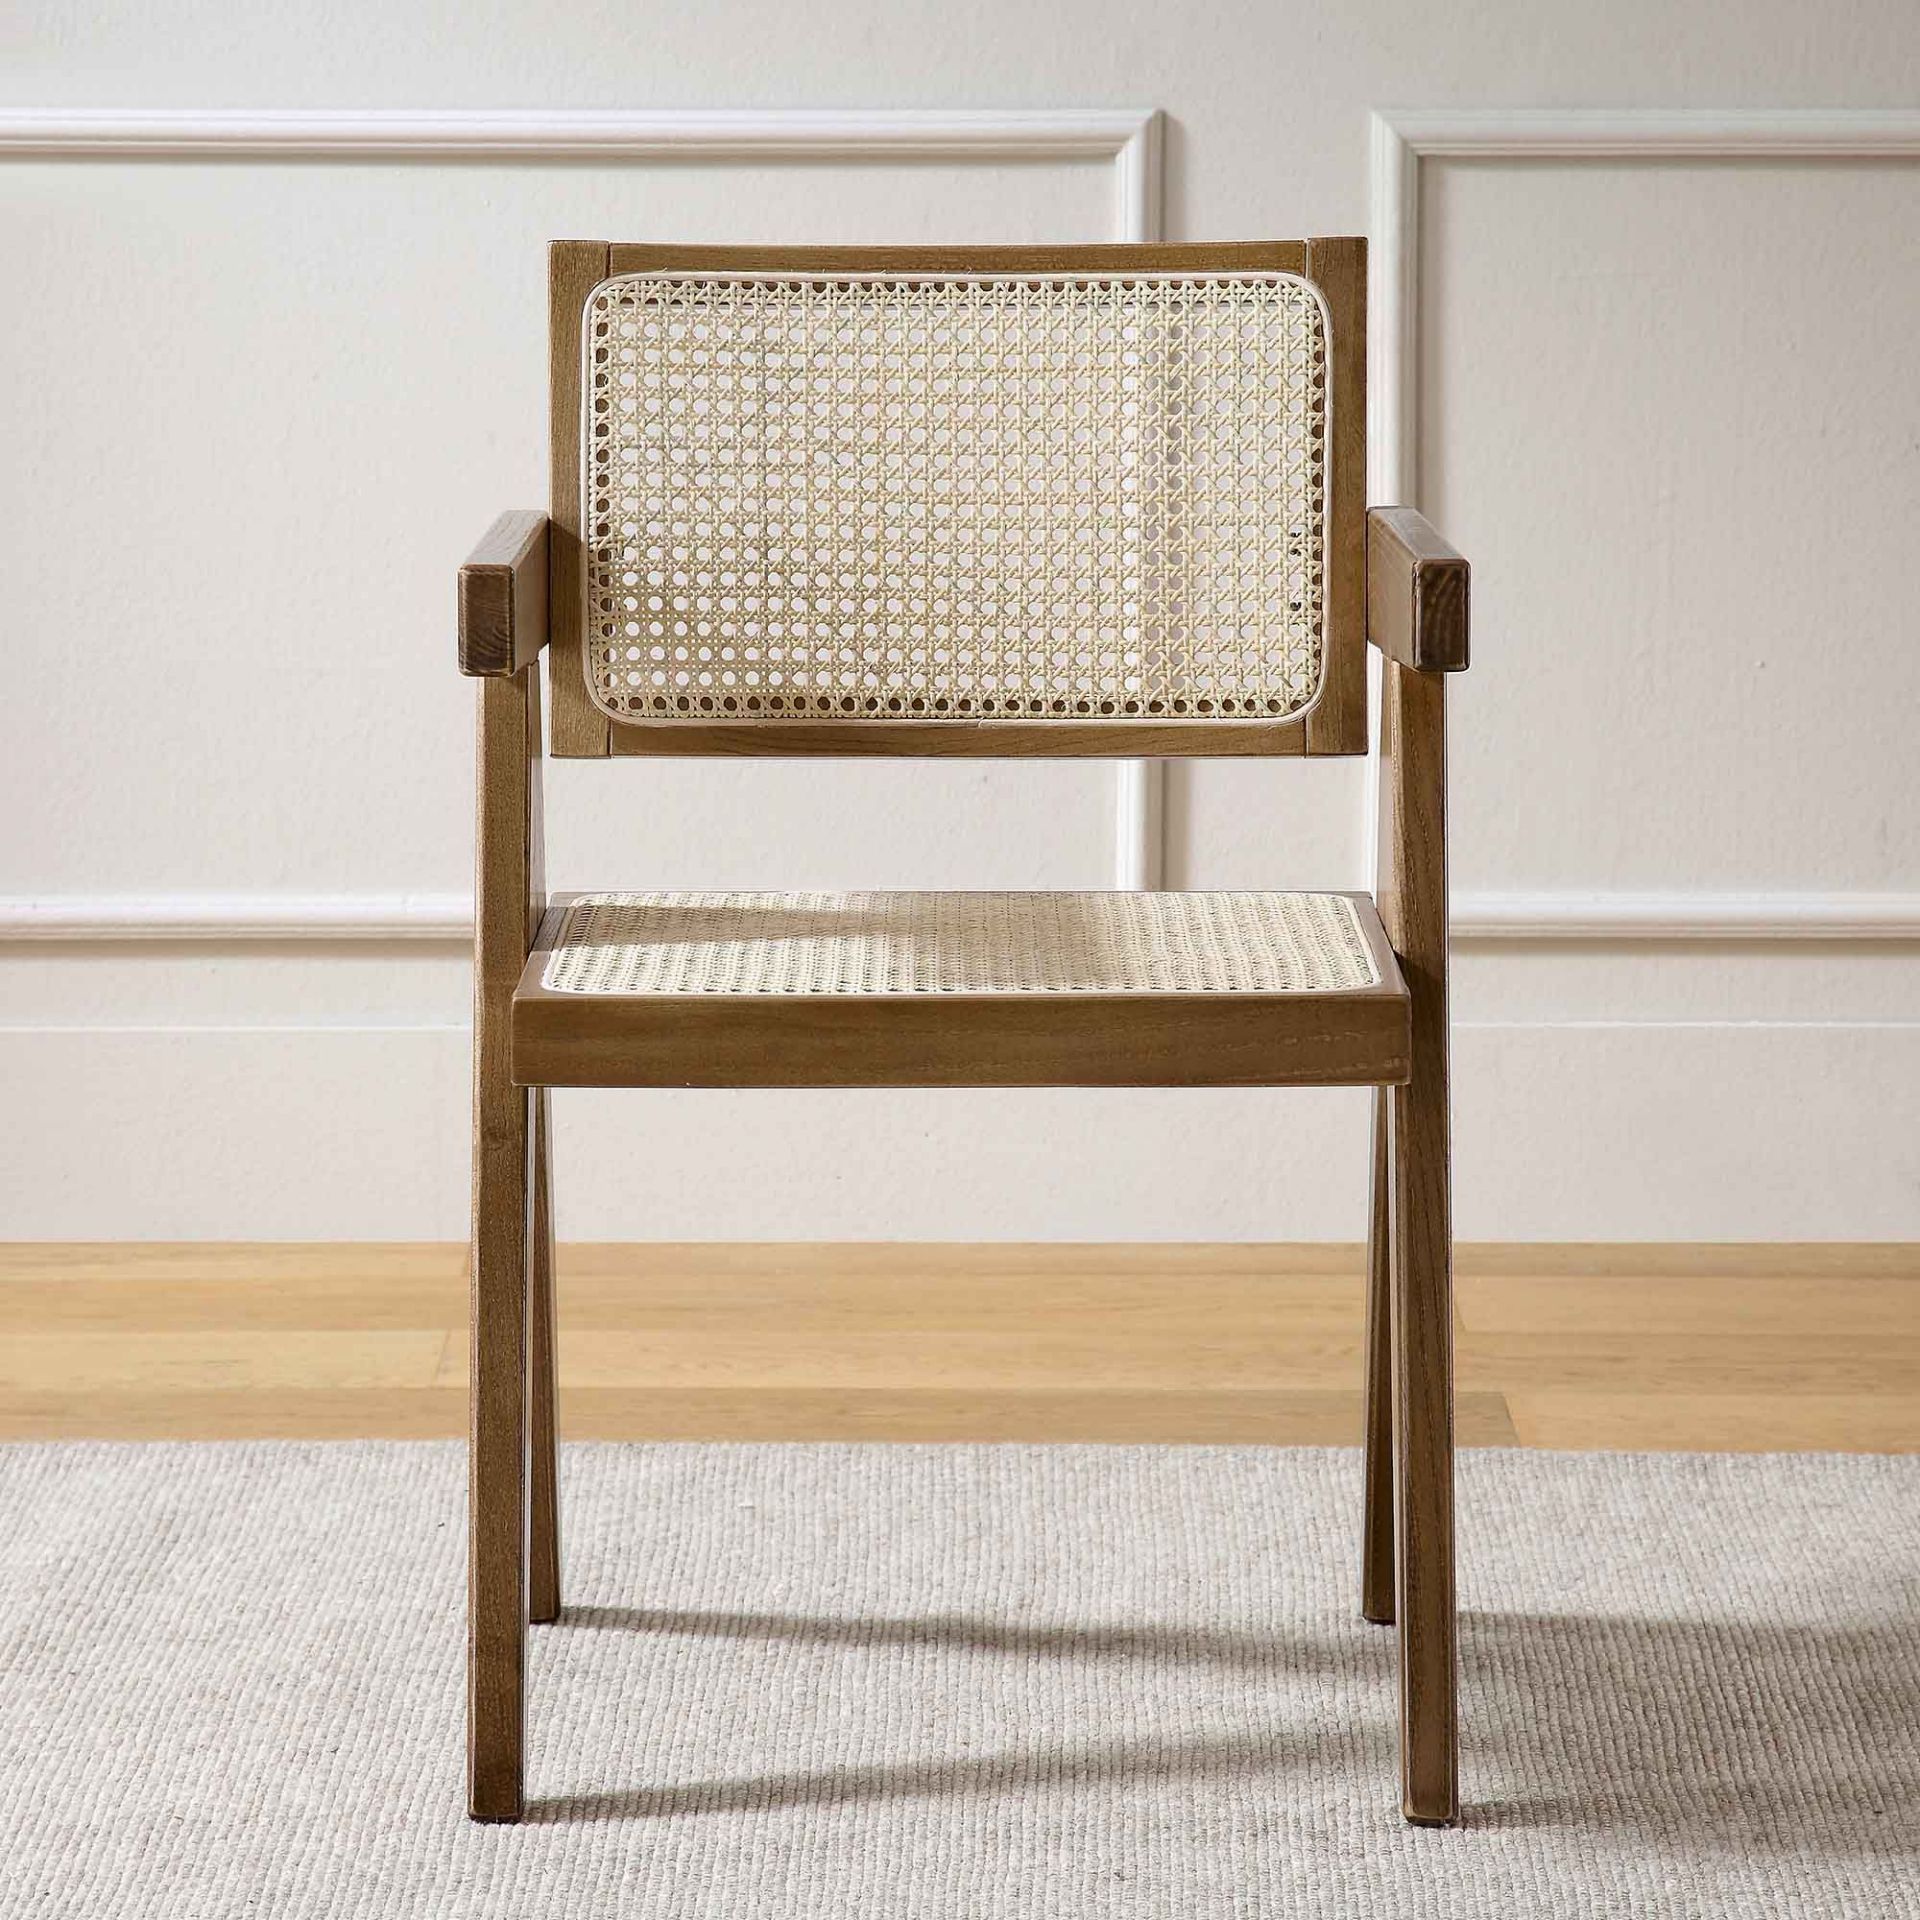 Jeanne Light Walnut Cane Rattan Solid Beech Wood Dining Chair. - R13.10. The cane rattan in the - Image 2 of 2